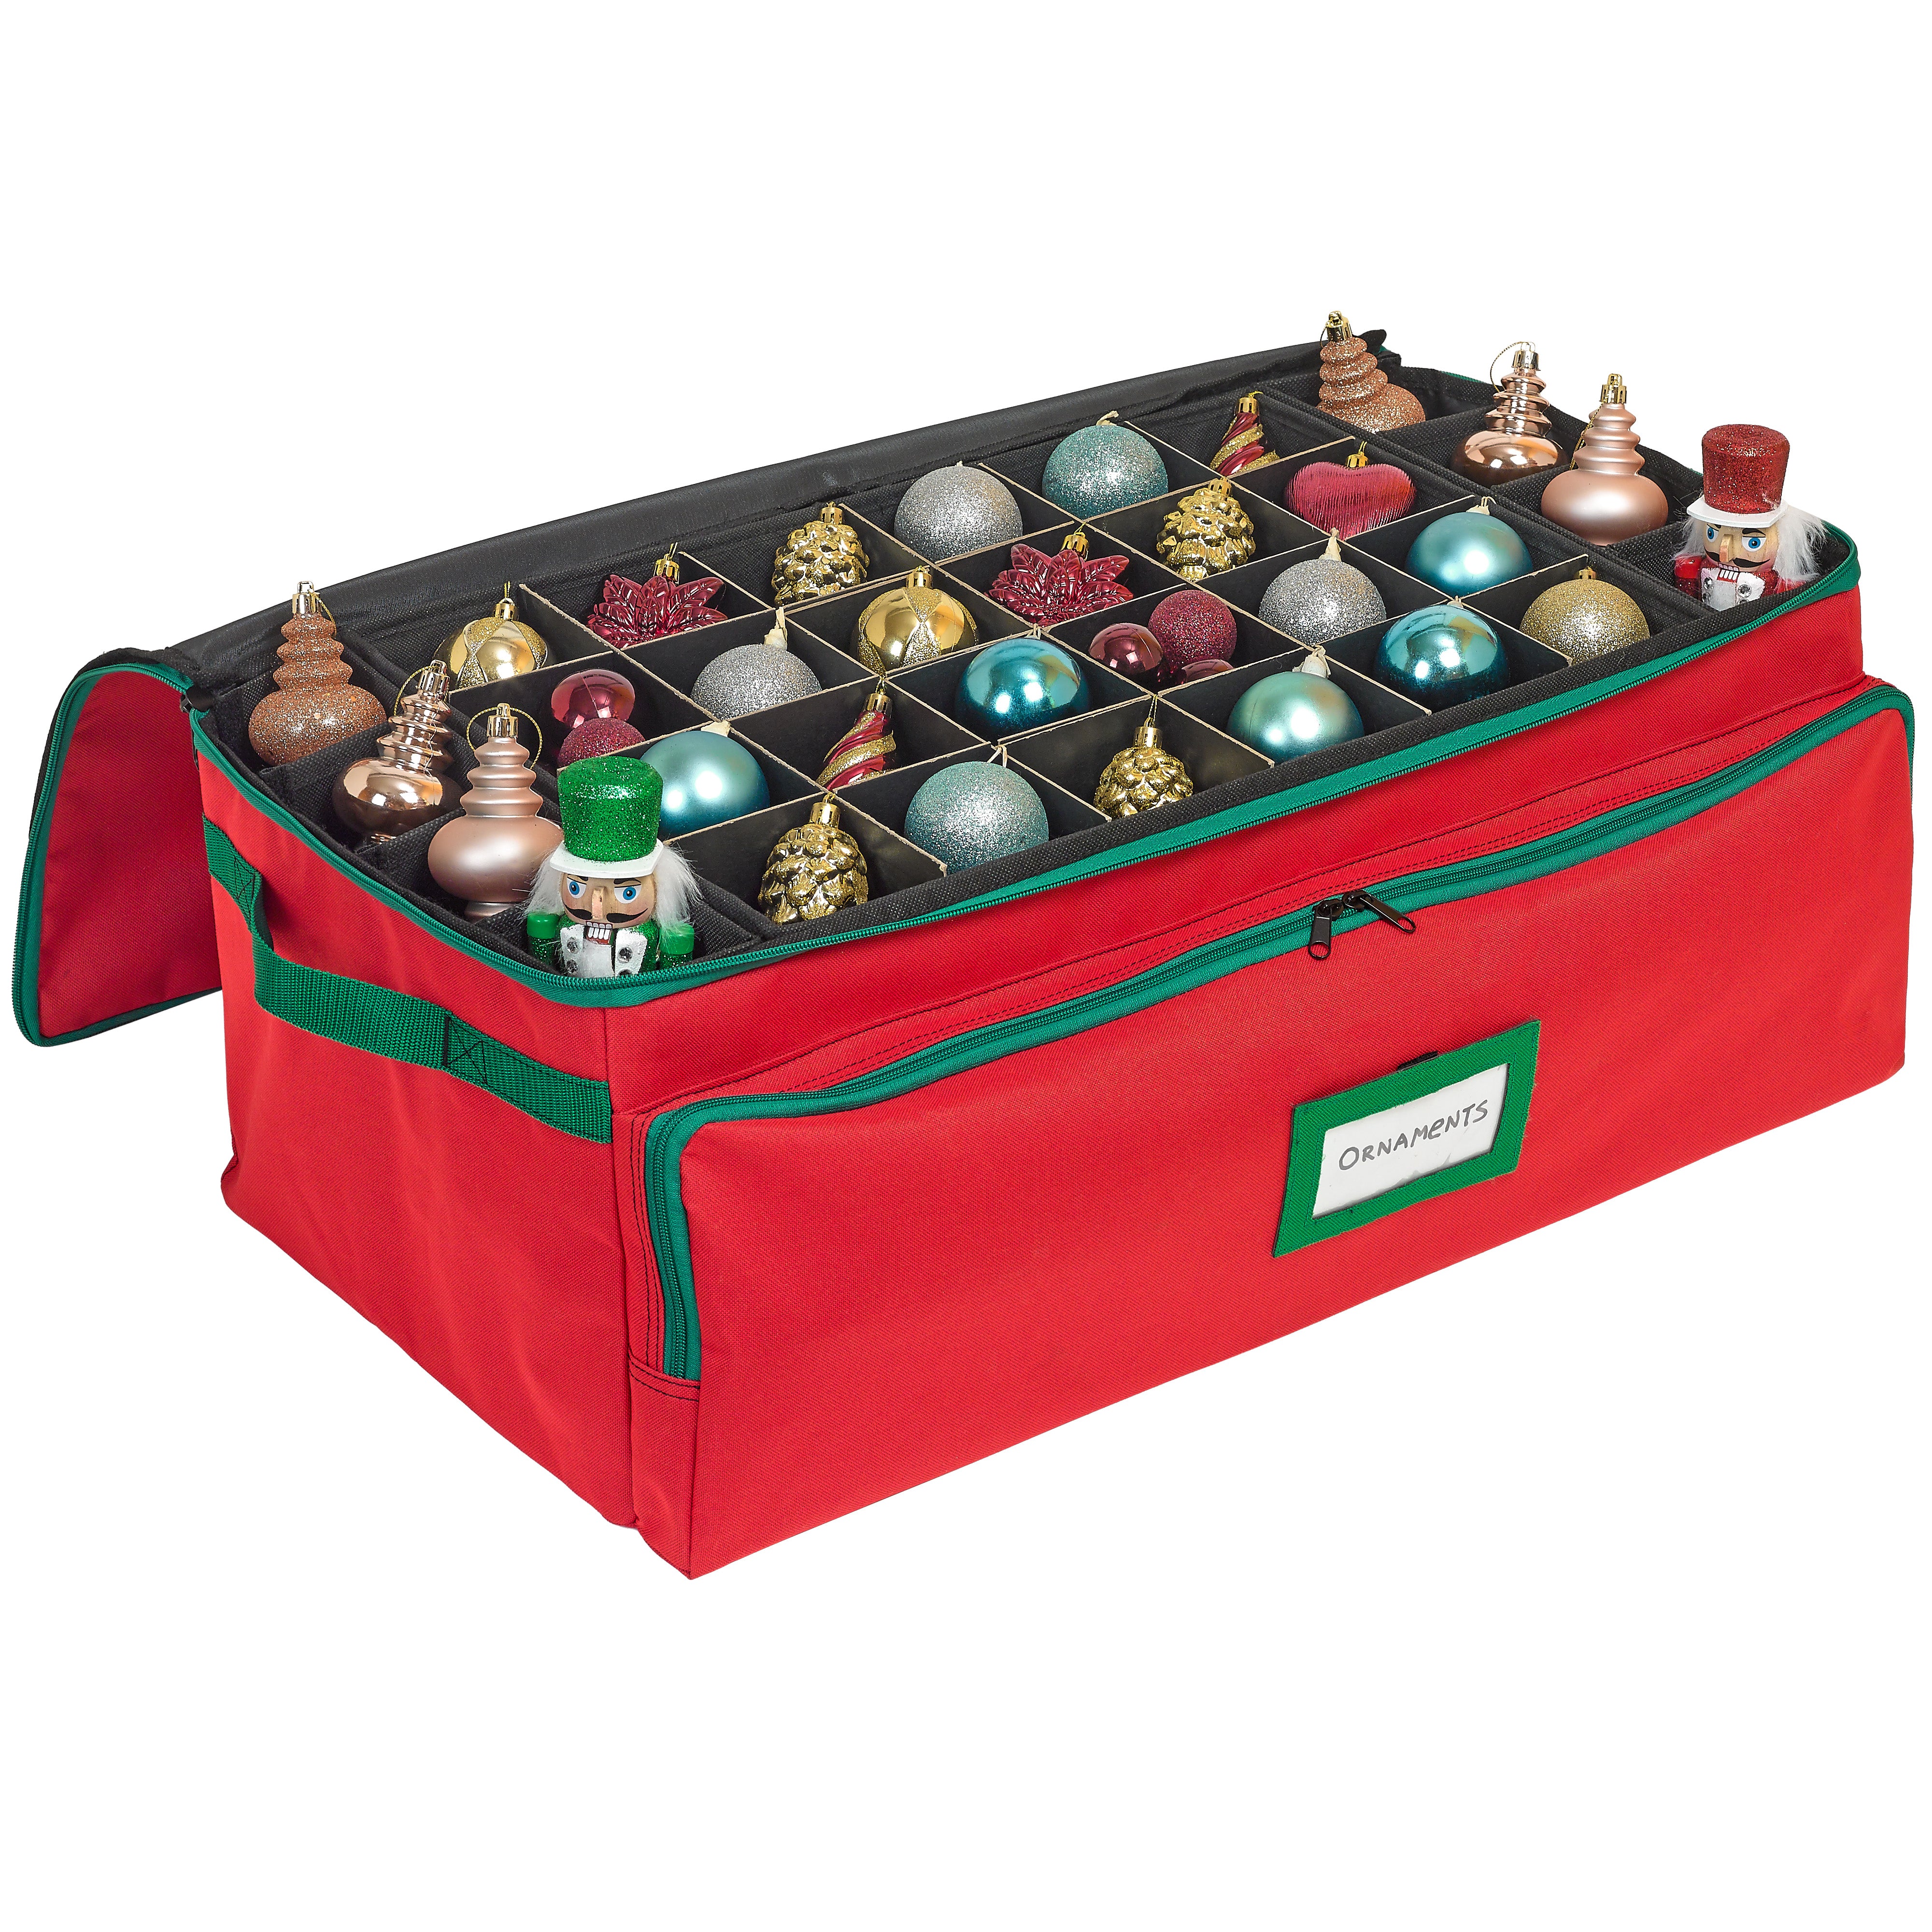 Christmas Ornament Storage Box - Hold Up to 72 - 3 Inch Ornaments, + 8 Side Slots for Figurines, Nutcrackers, etc. Decoration Organizer - 600D Canvas.